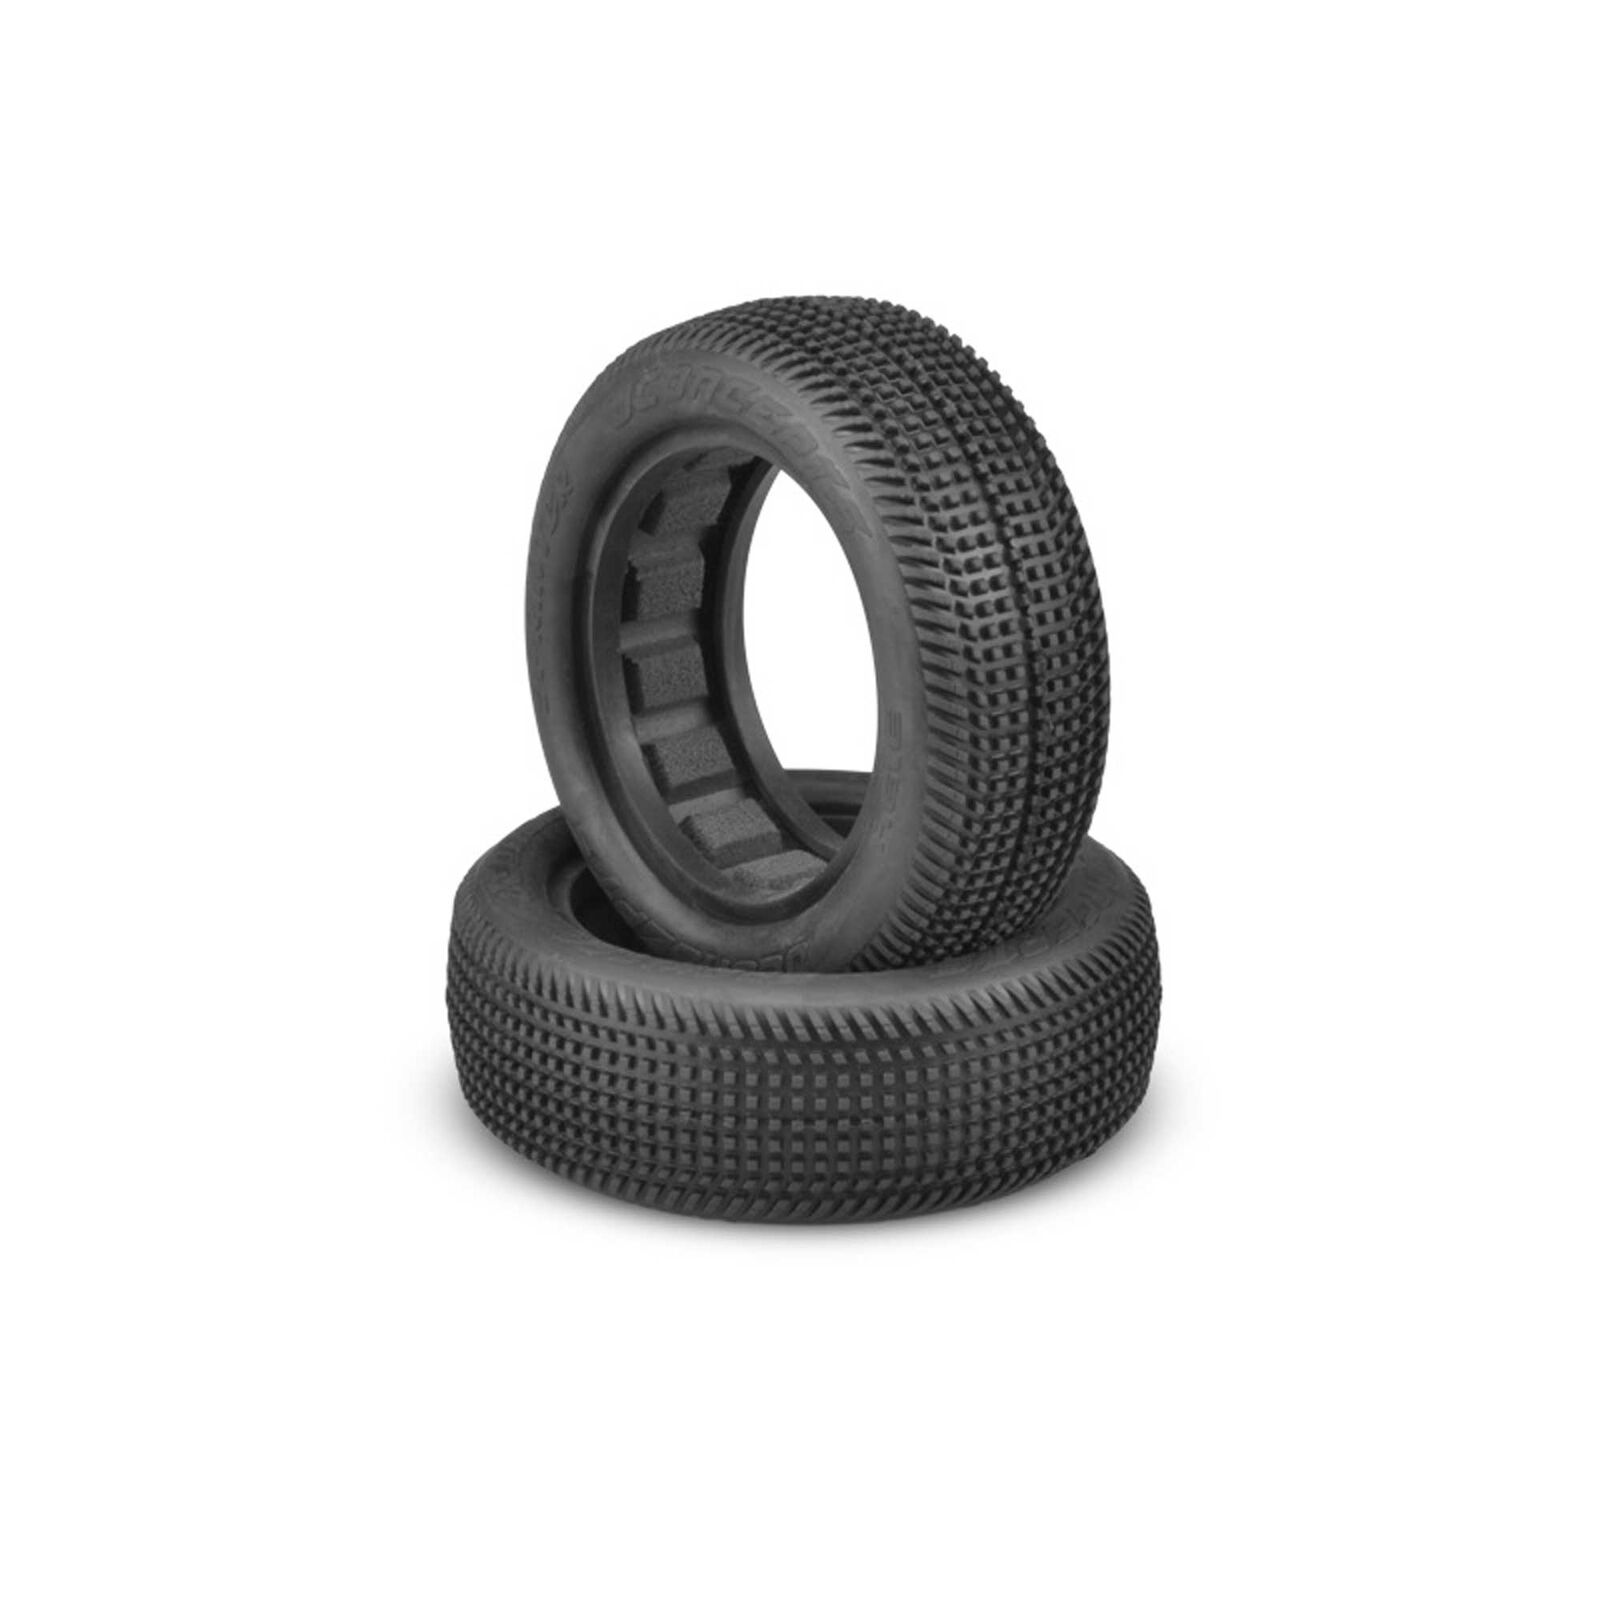 1/10 Sprinter 2.2” Front Buggy Tires and Inserts, Blue Compound (2)